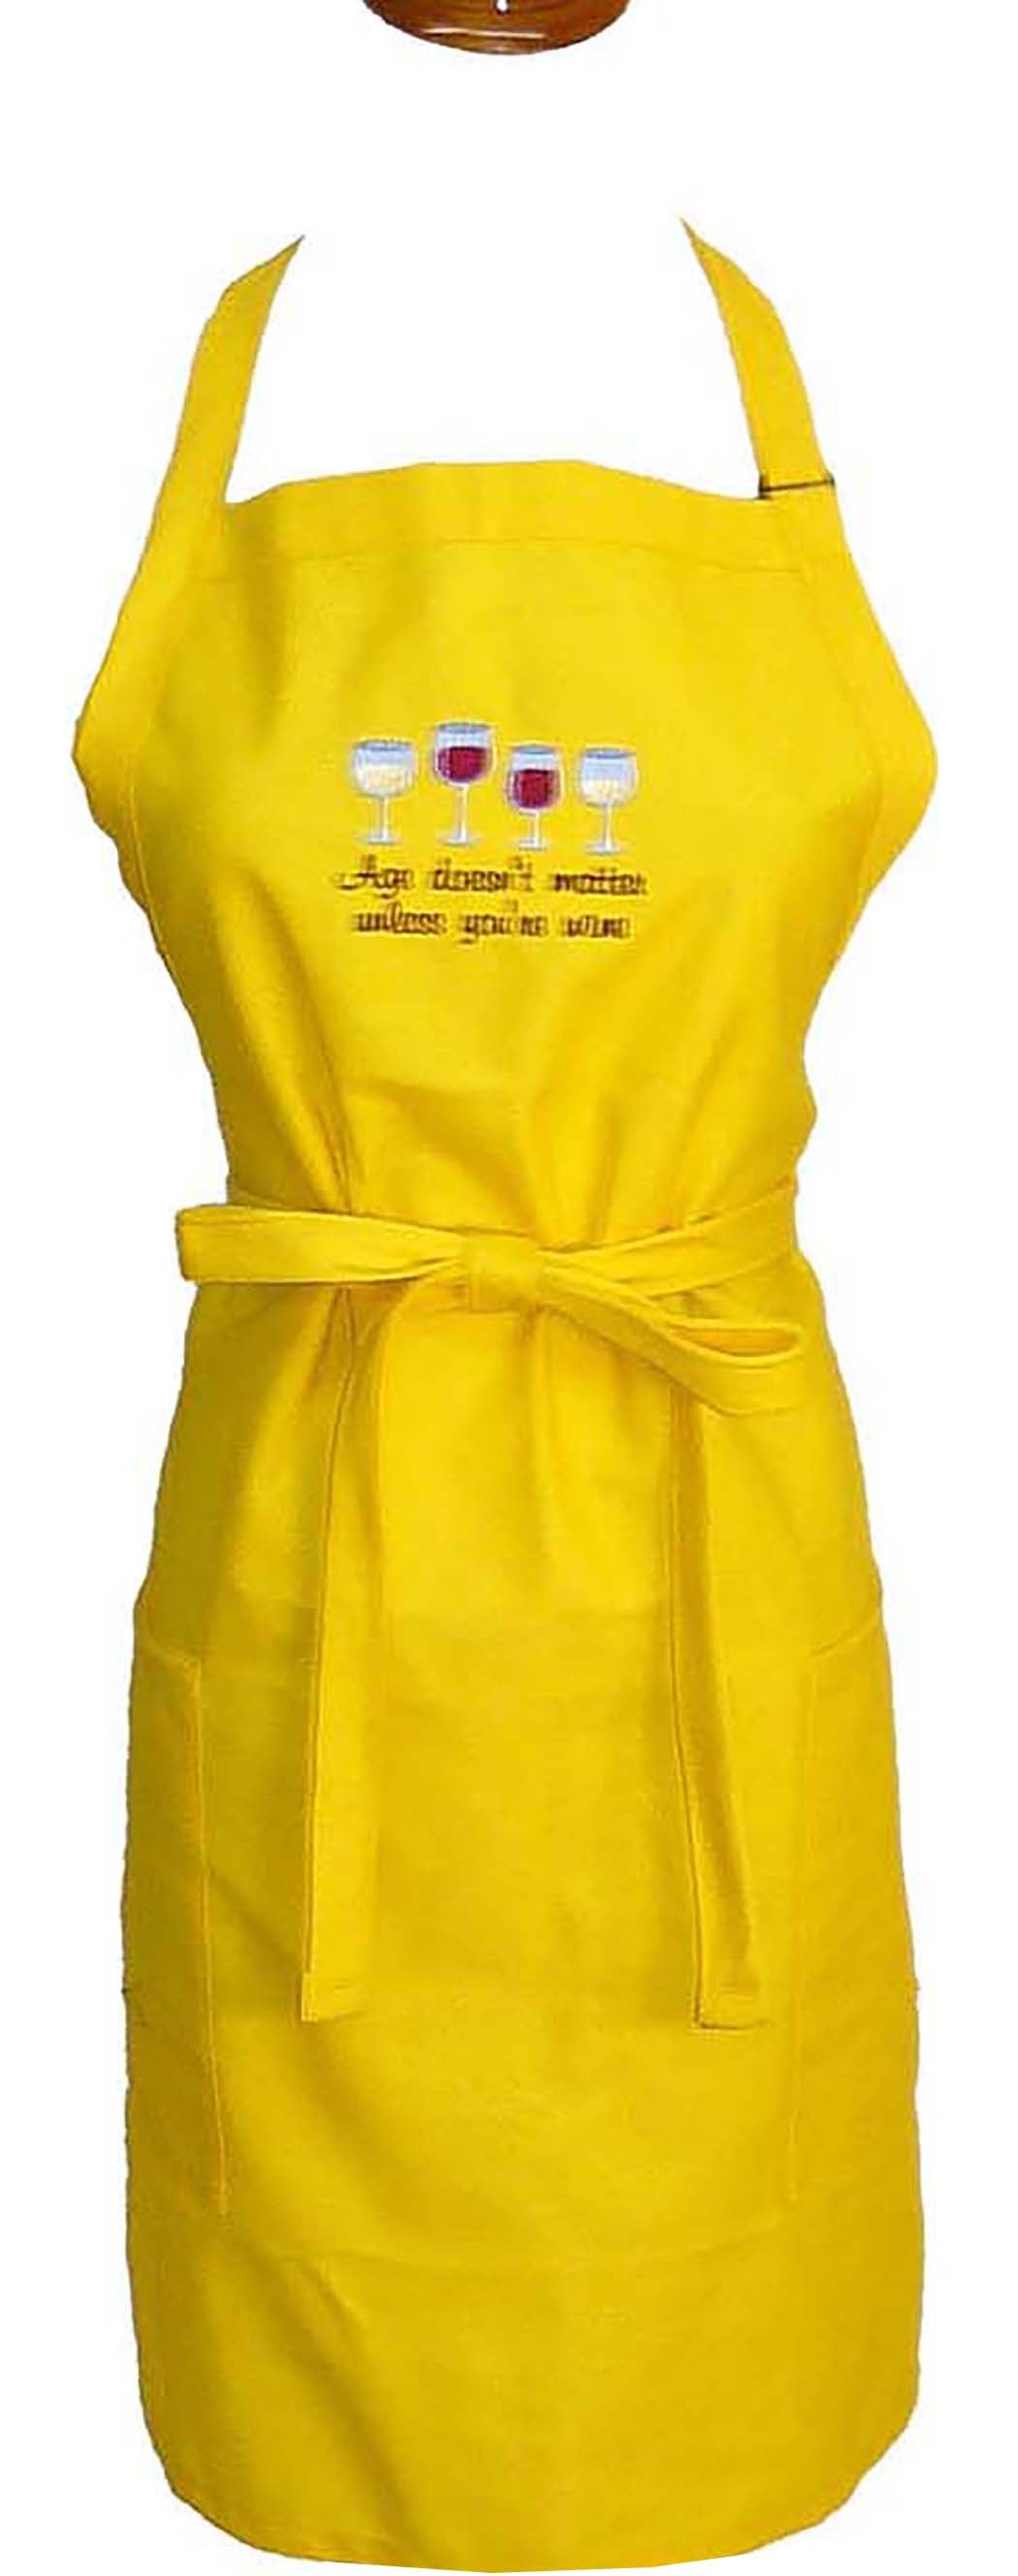 Age doesn't Matter Unless You're Wine, Yellow Adult Large Apron